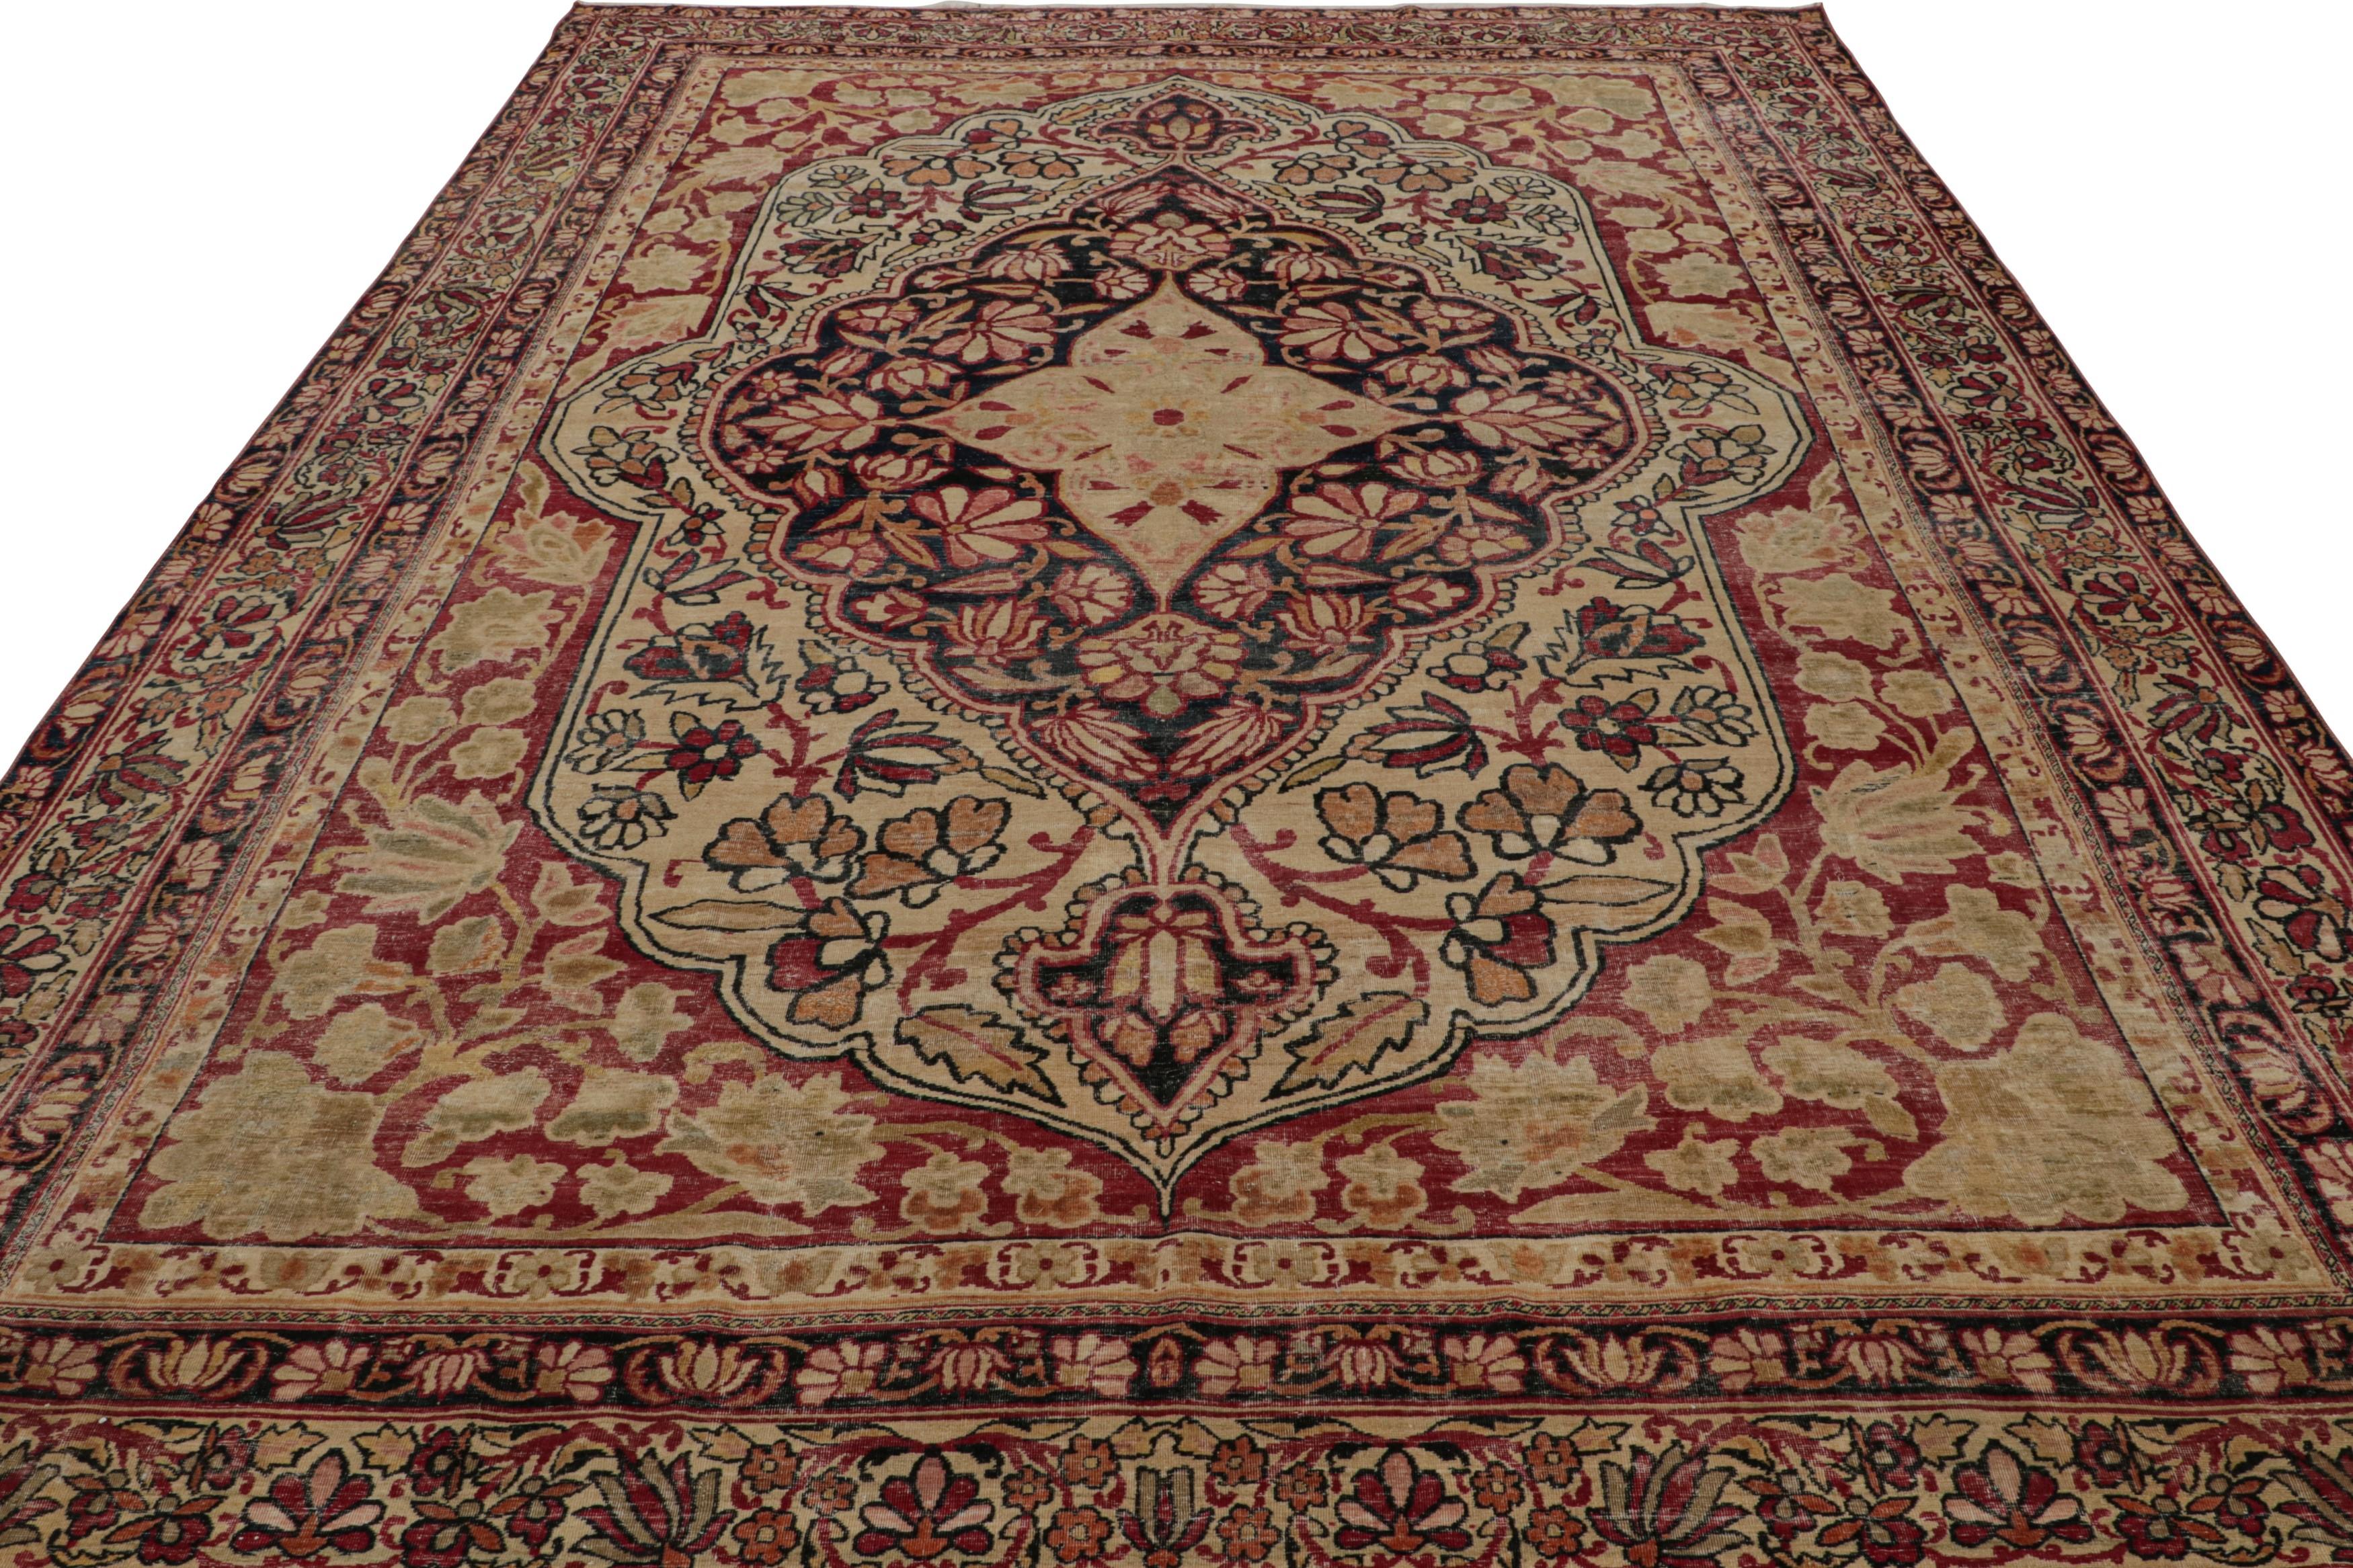 Hand-Woven Antique Persian Kerman Lavar rug, with Floral Patterns, from Rug & Kilim For Sale